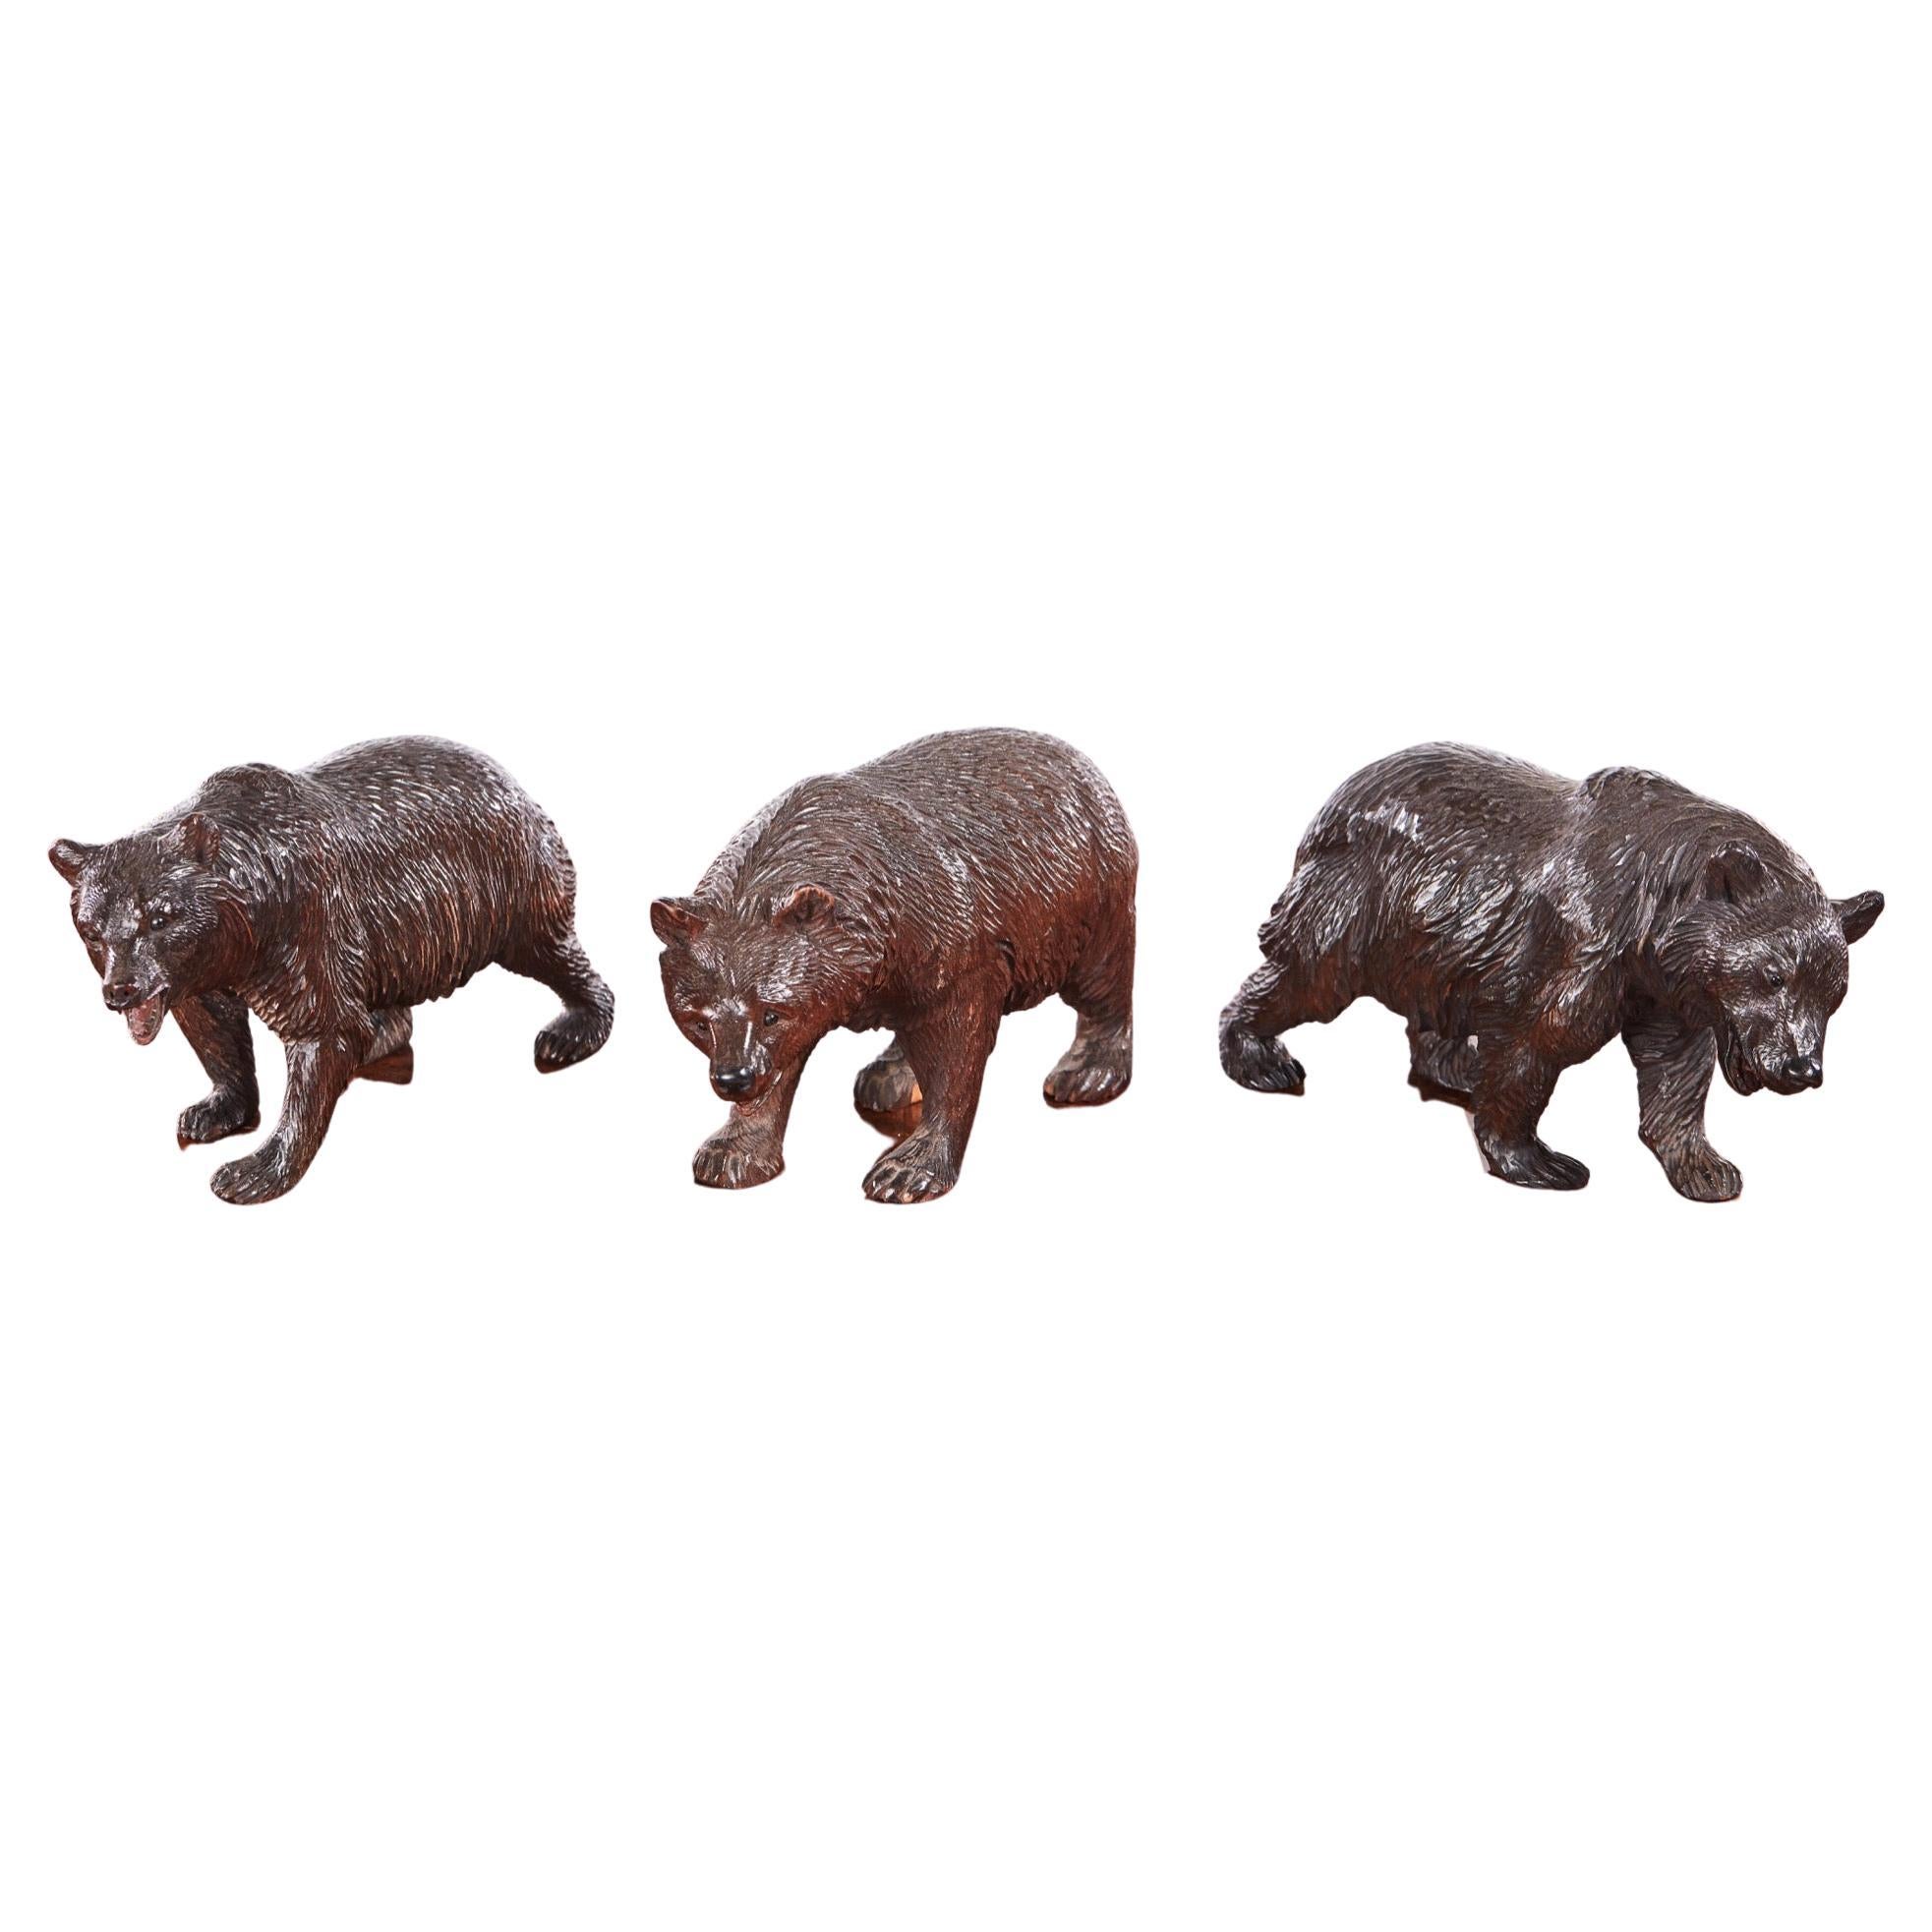 Quality Set of Three Antique Carved Black Forest Bears